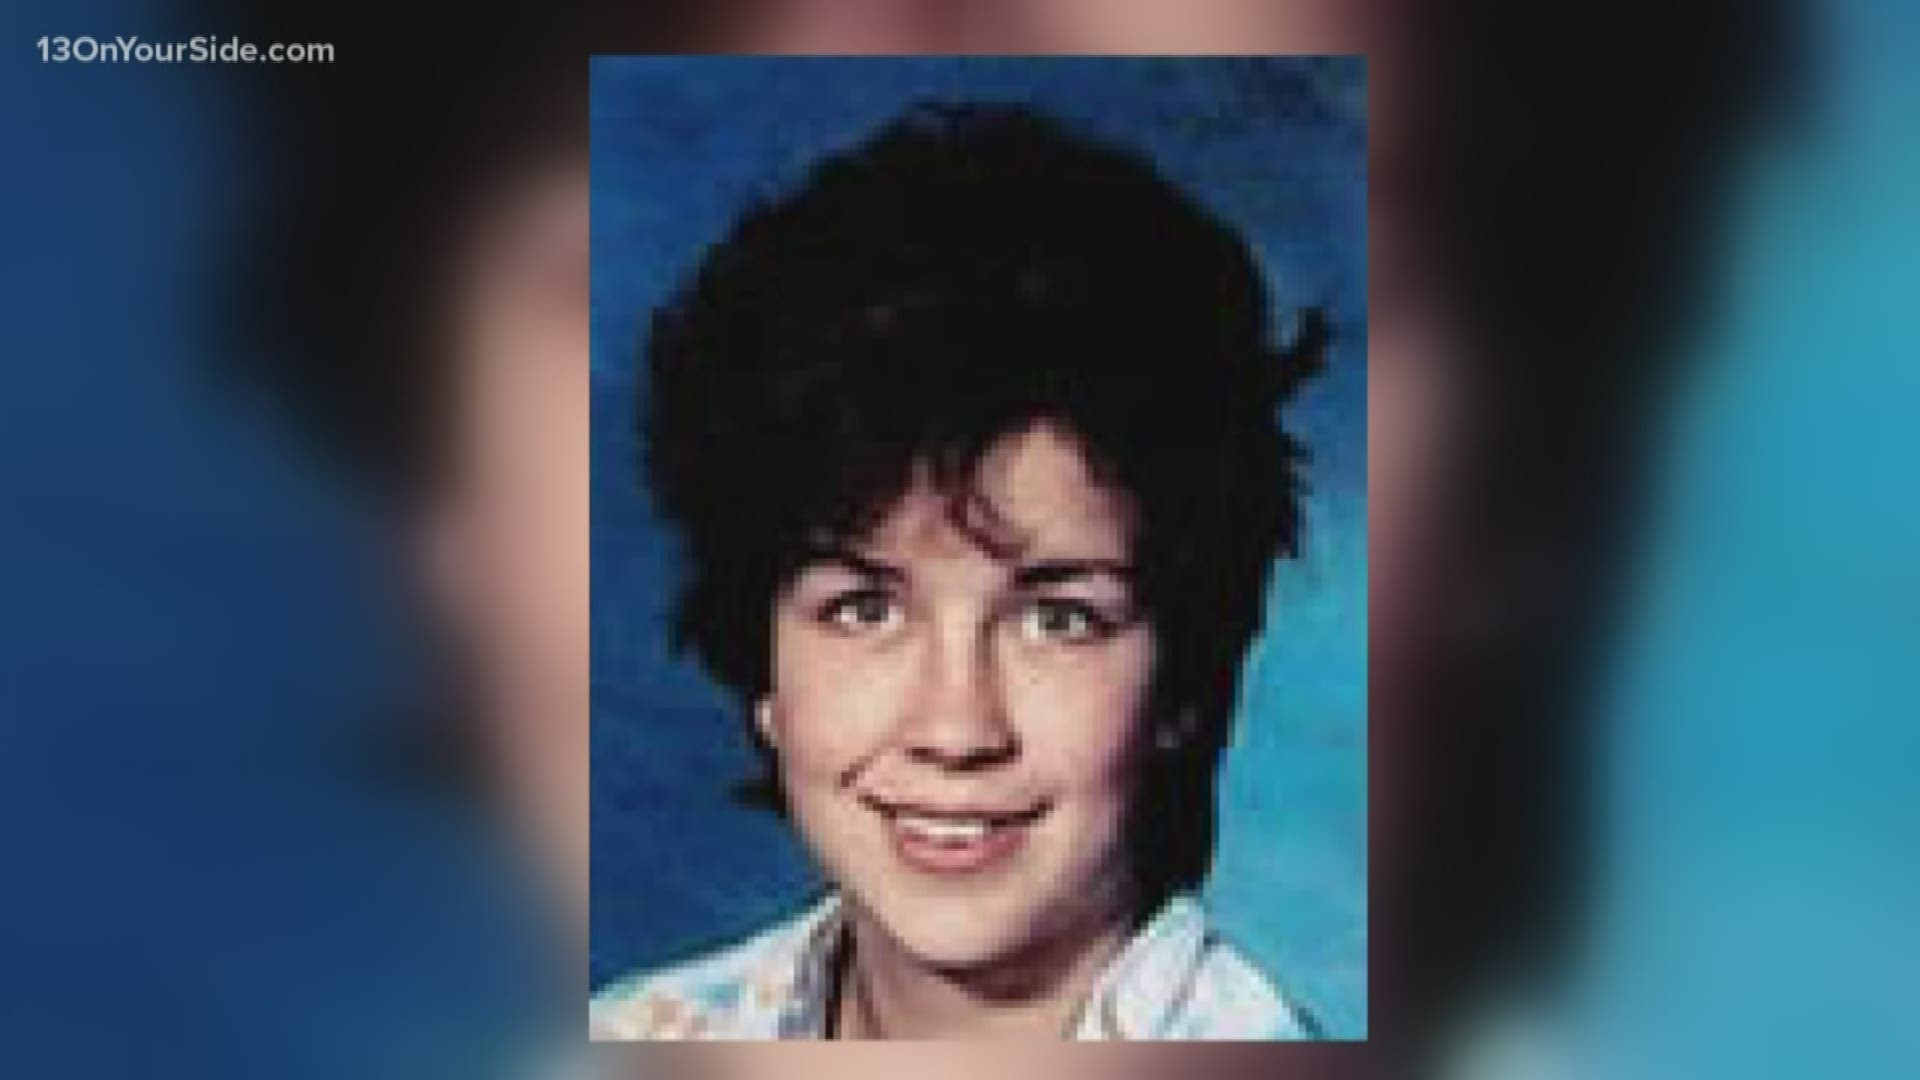 Cathy Terkanian hopes the arrest of Dennis Bowman for a 1980 murder will lead to answers about her missing daughter.